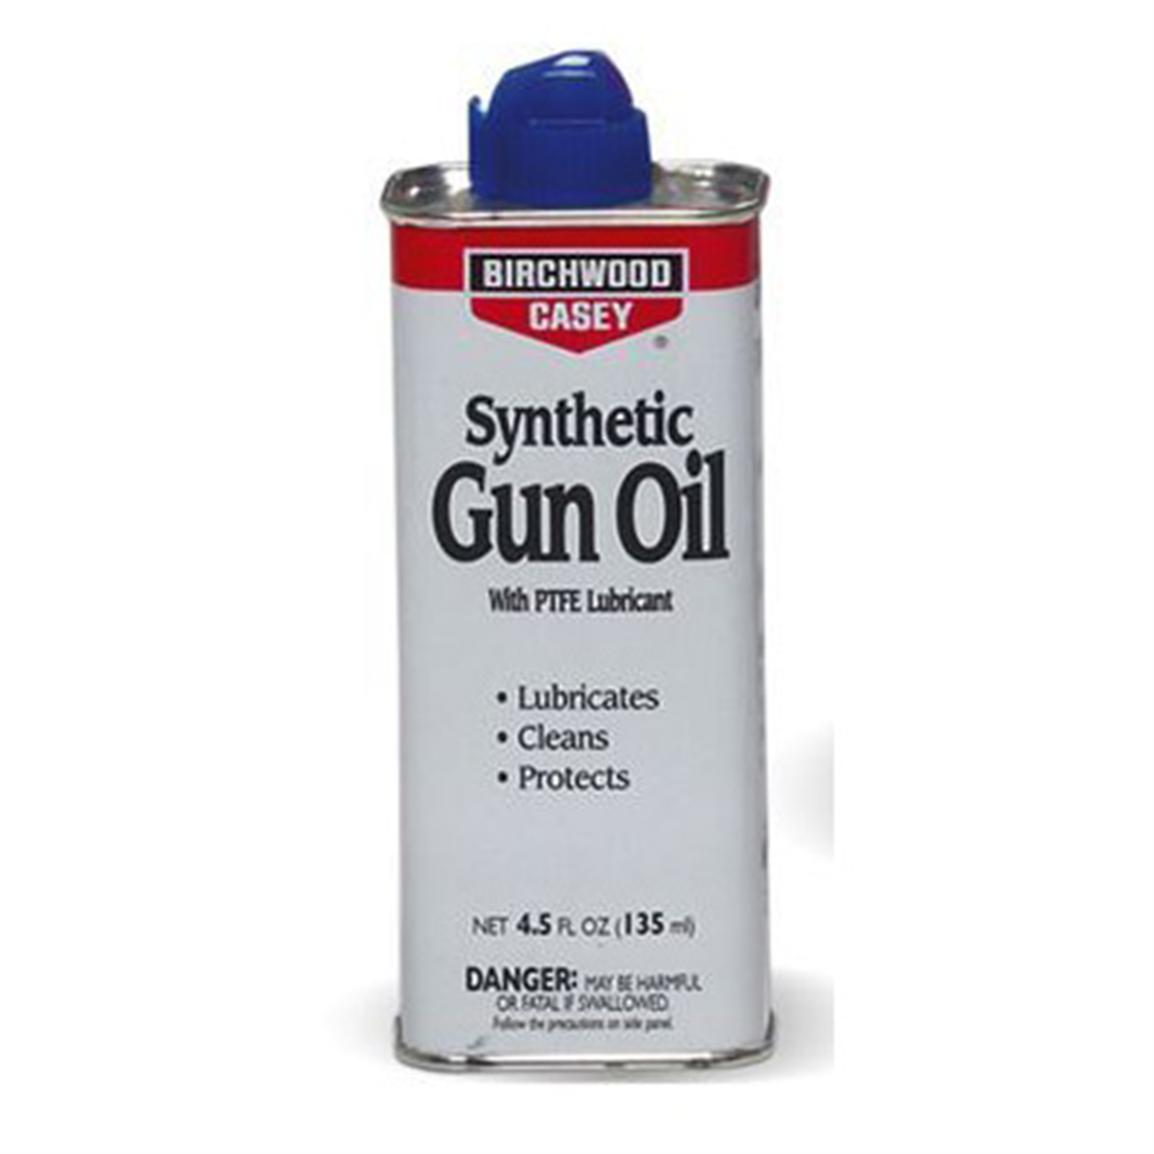 Birchwood Casey Synthetic Gun Oil With PTFE Lubricant